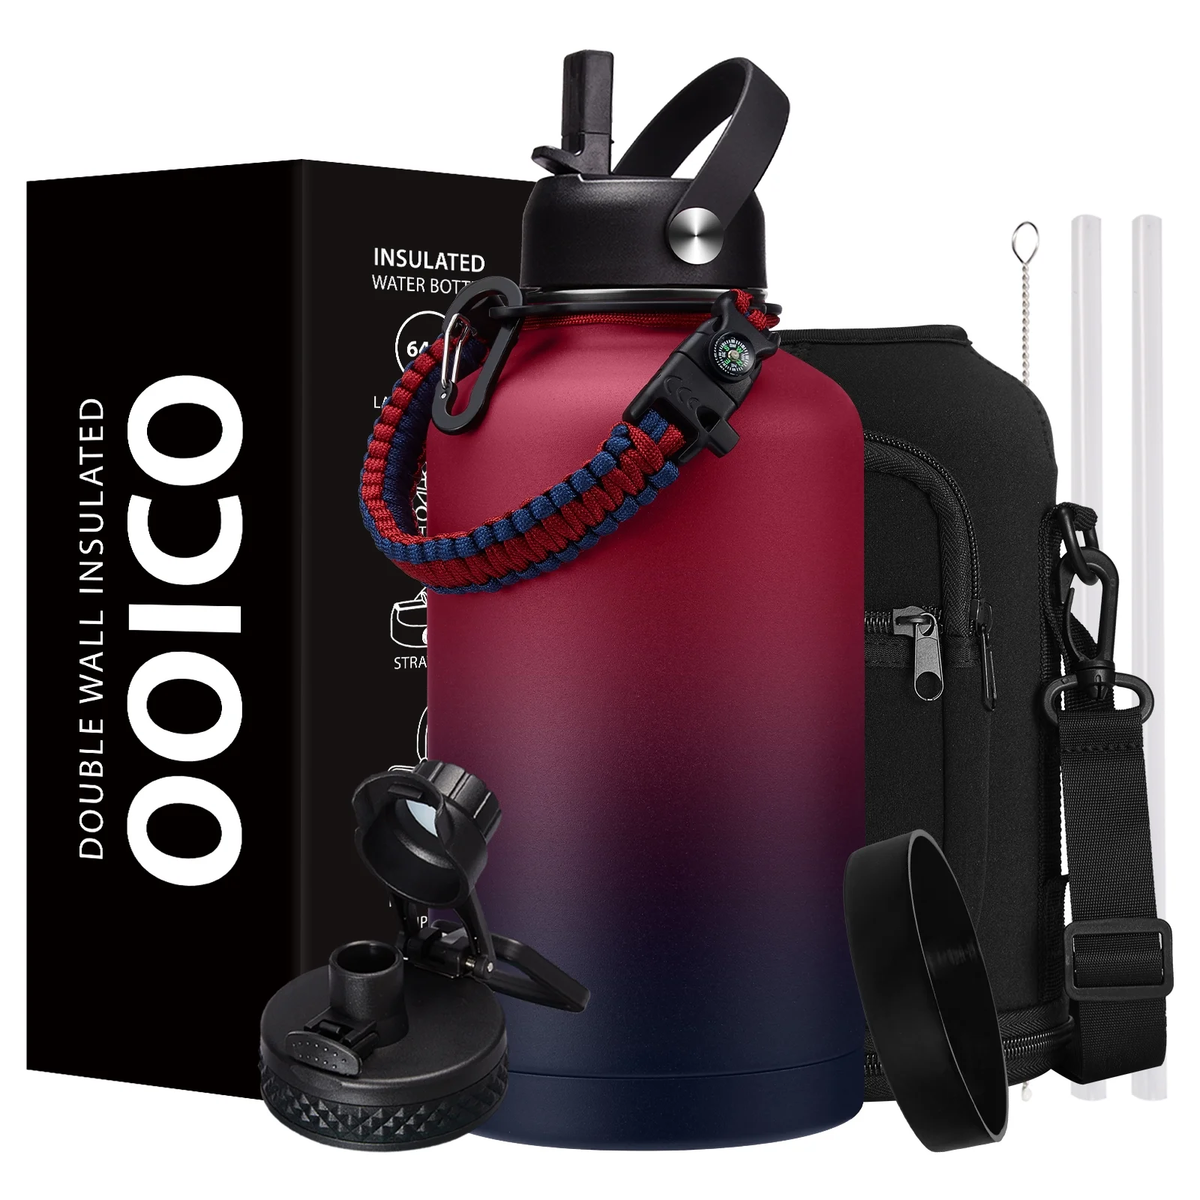 OOICO™ Insulated Water Bottle